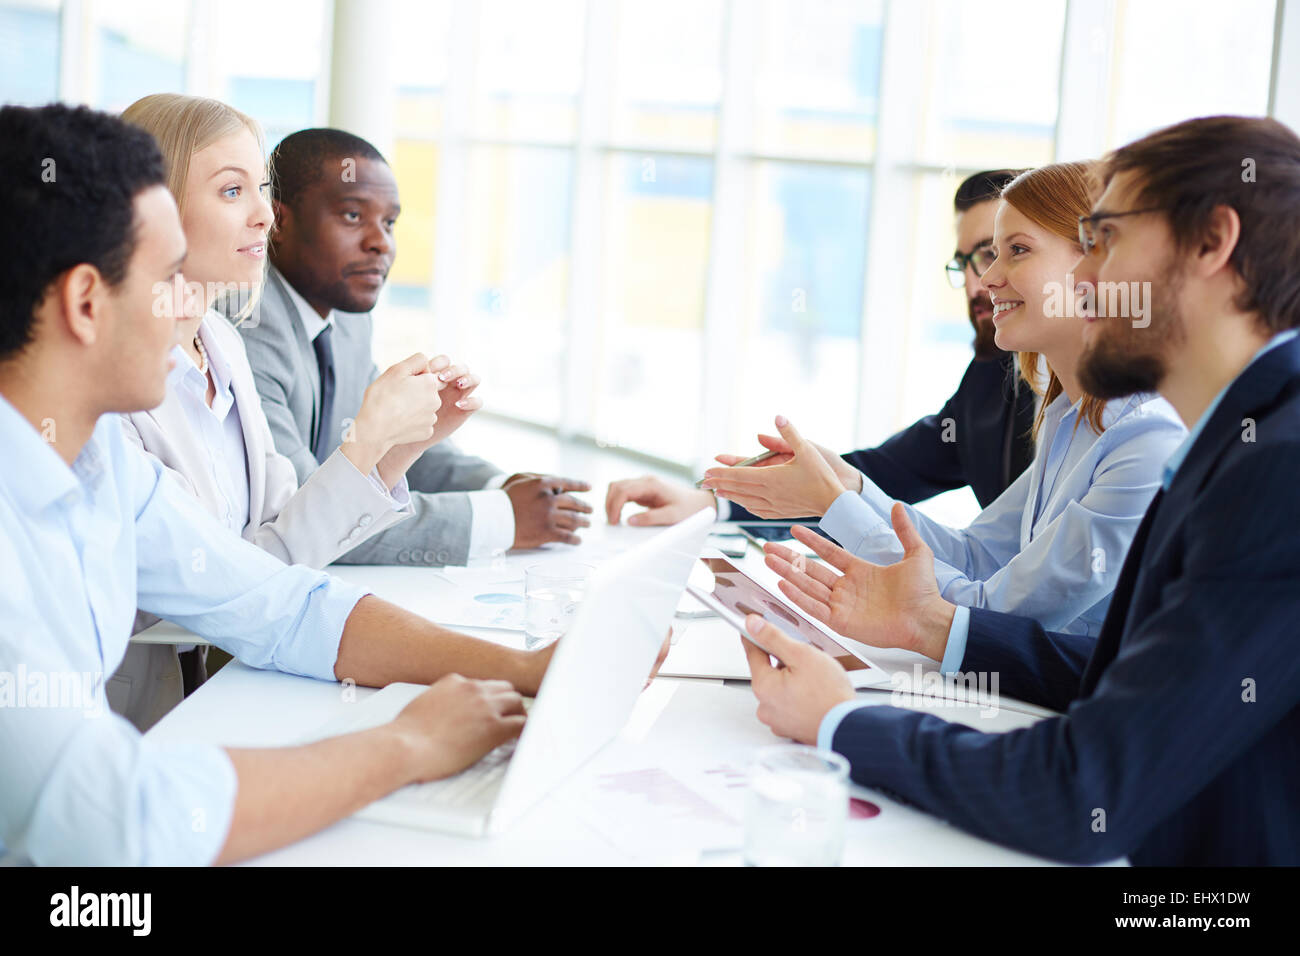 Two groups of people sitting opposite and communicating Stock Photo